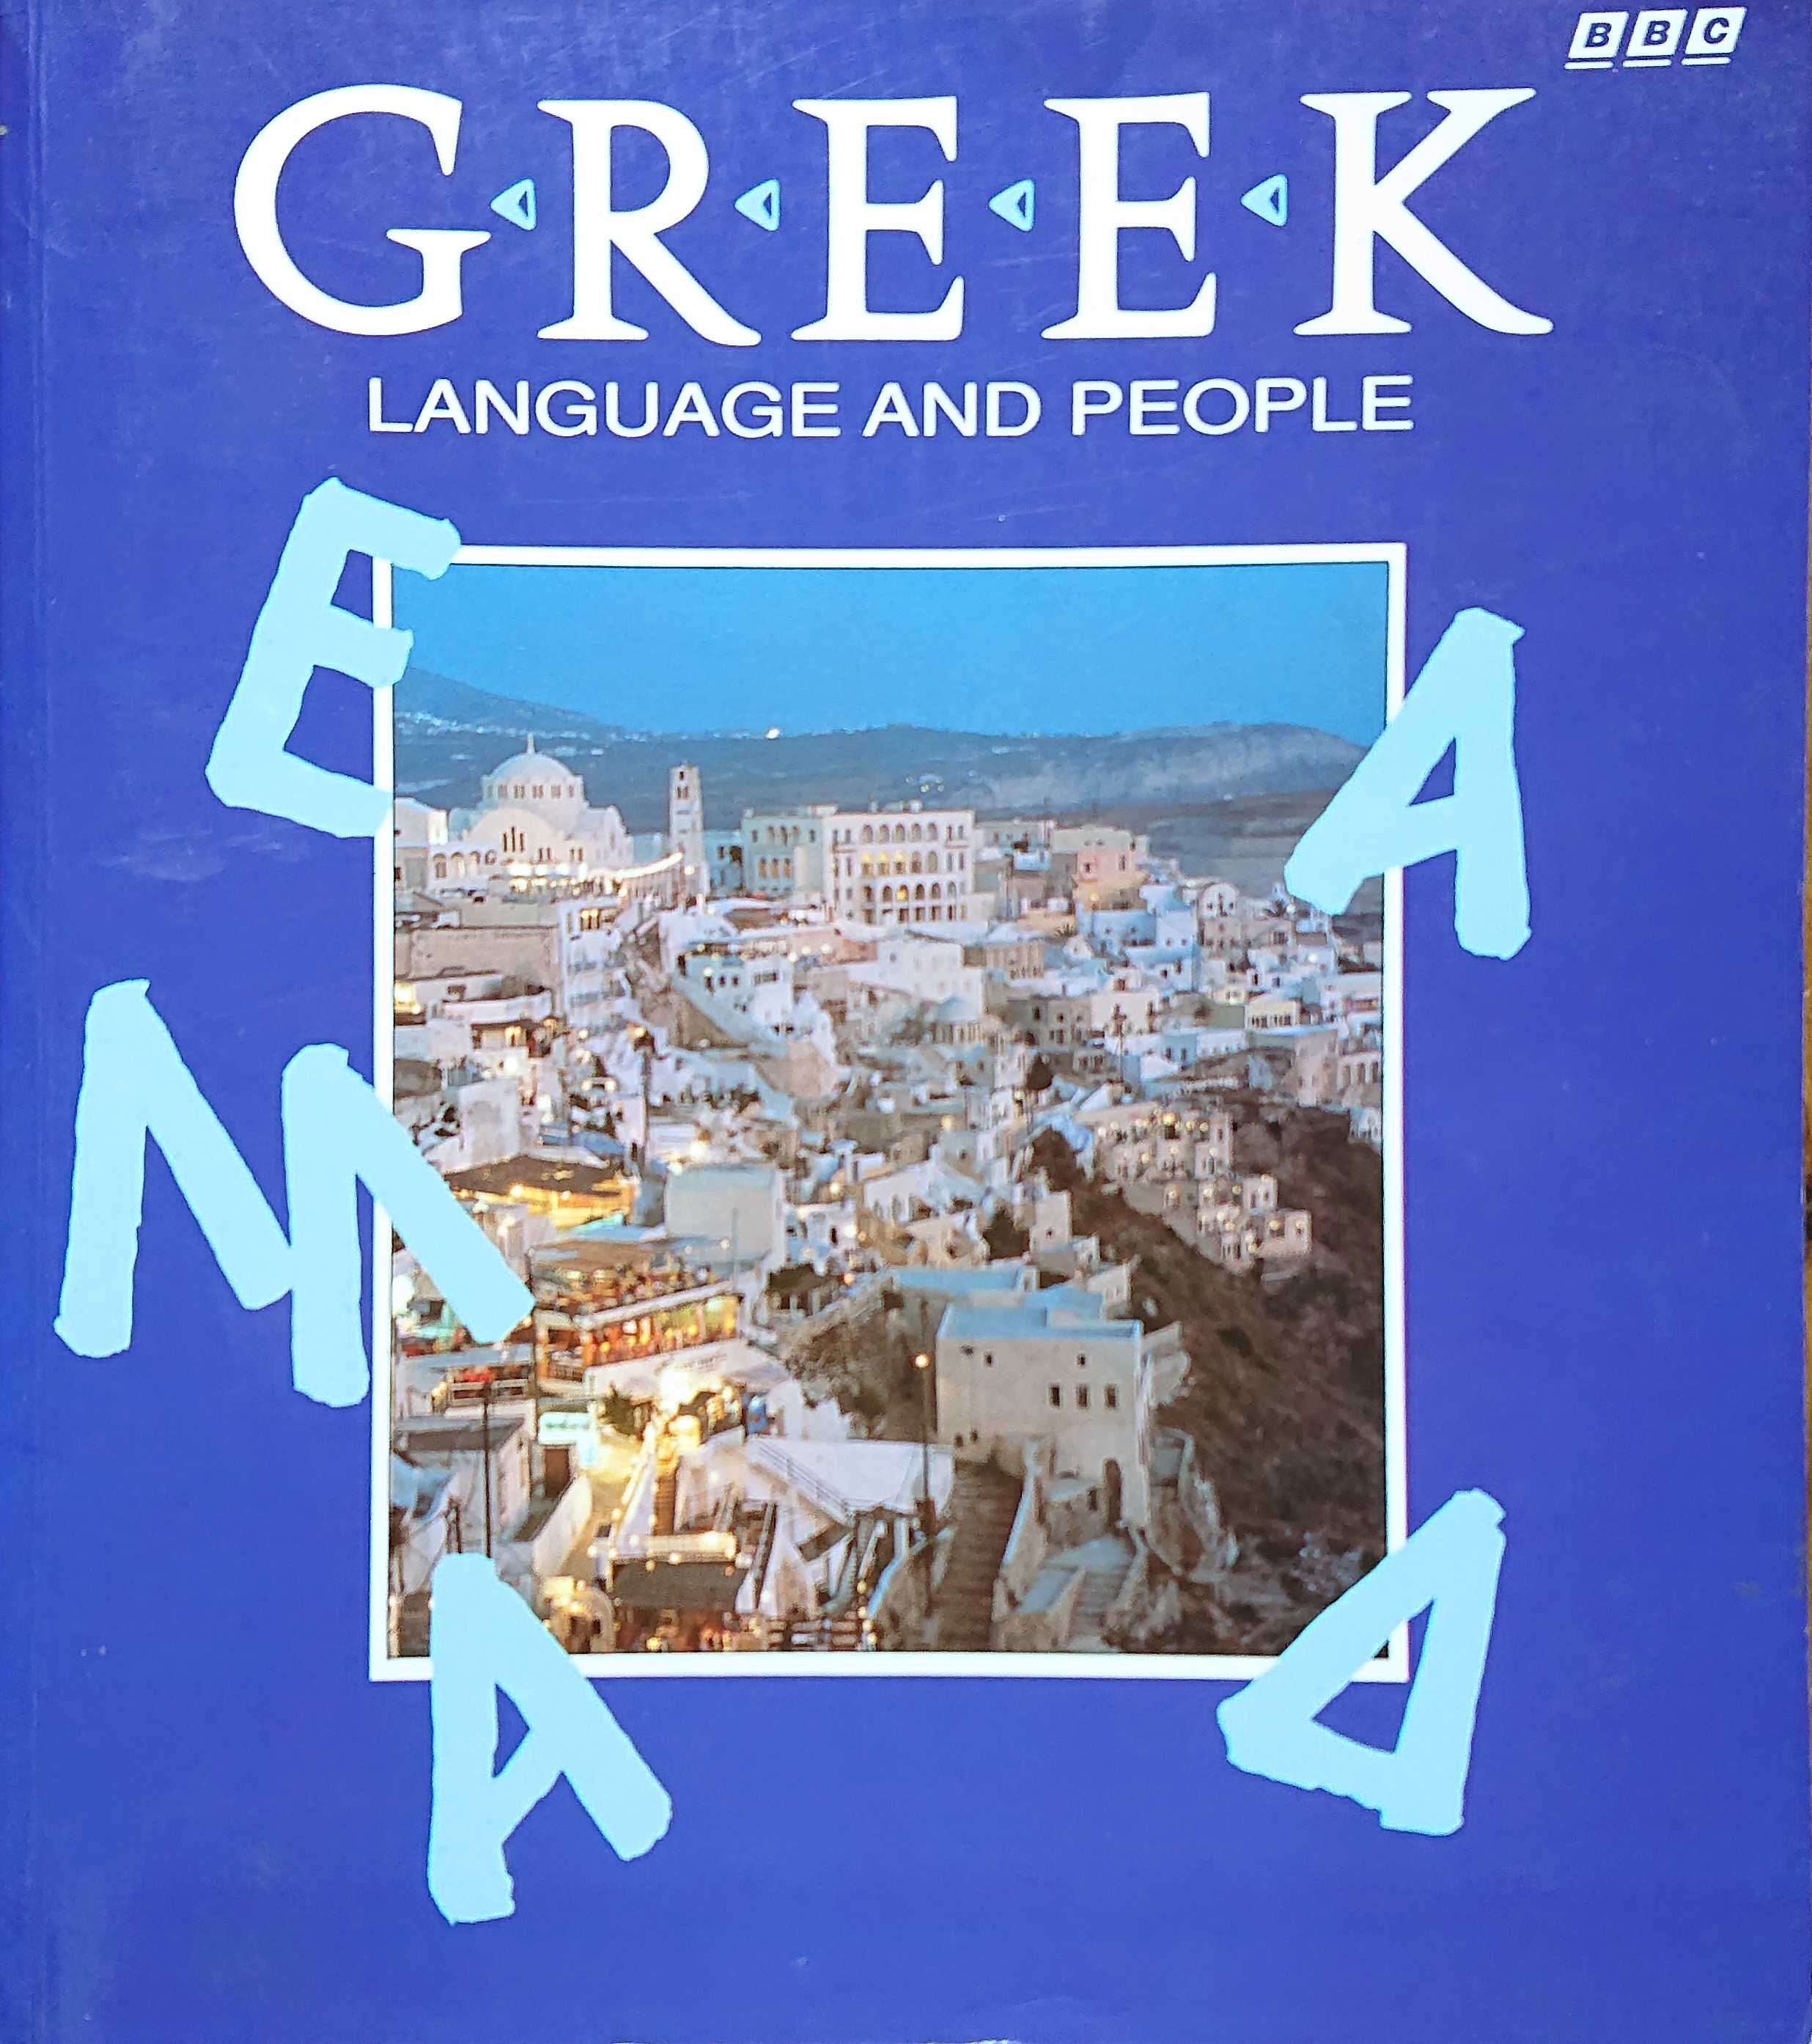 Picture of Greek language and people by artist David A. Hardy from the BBC books - Records and Tapes library